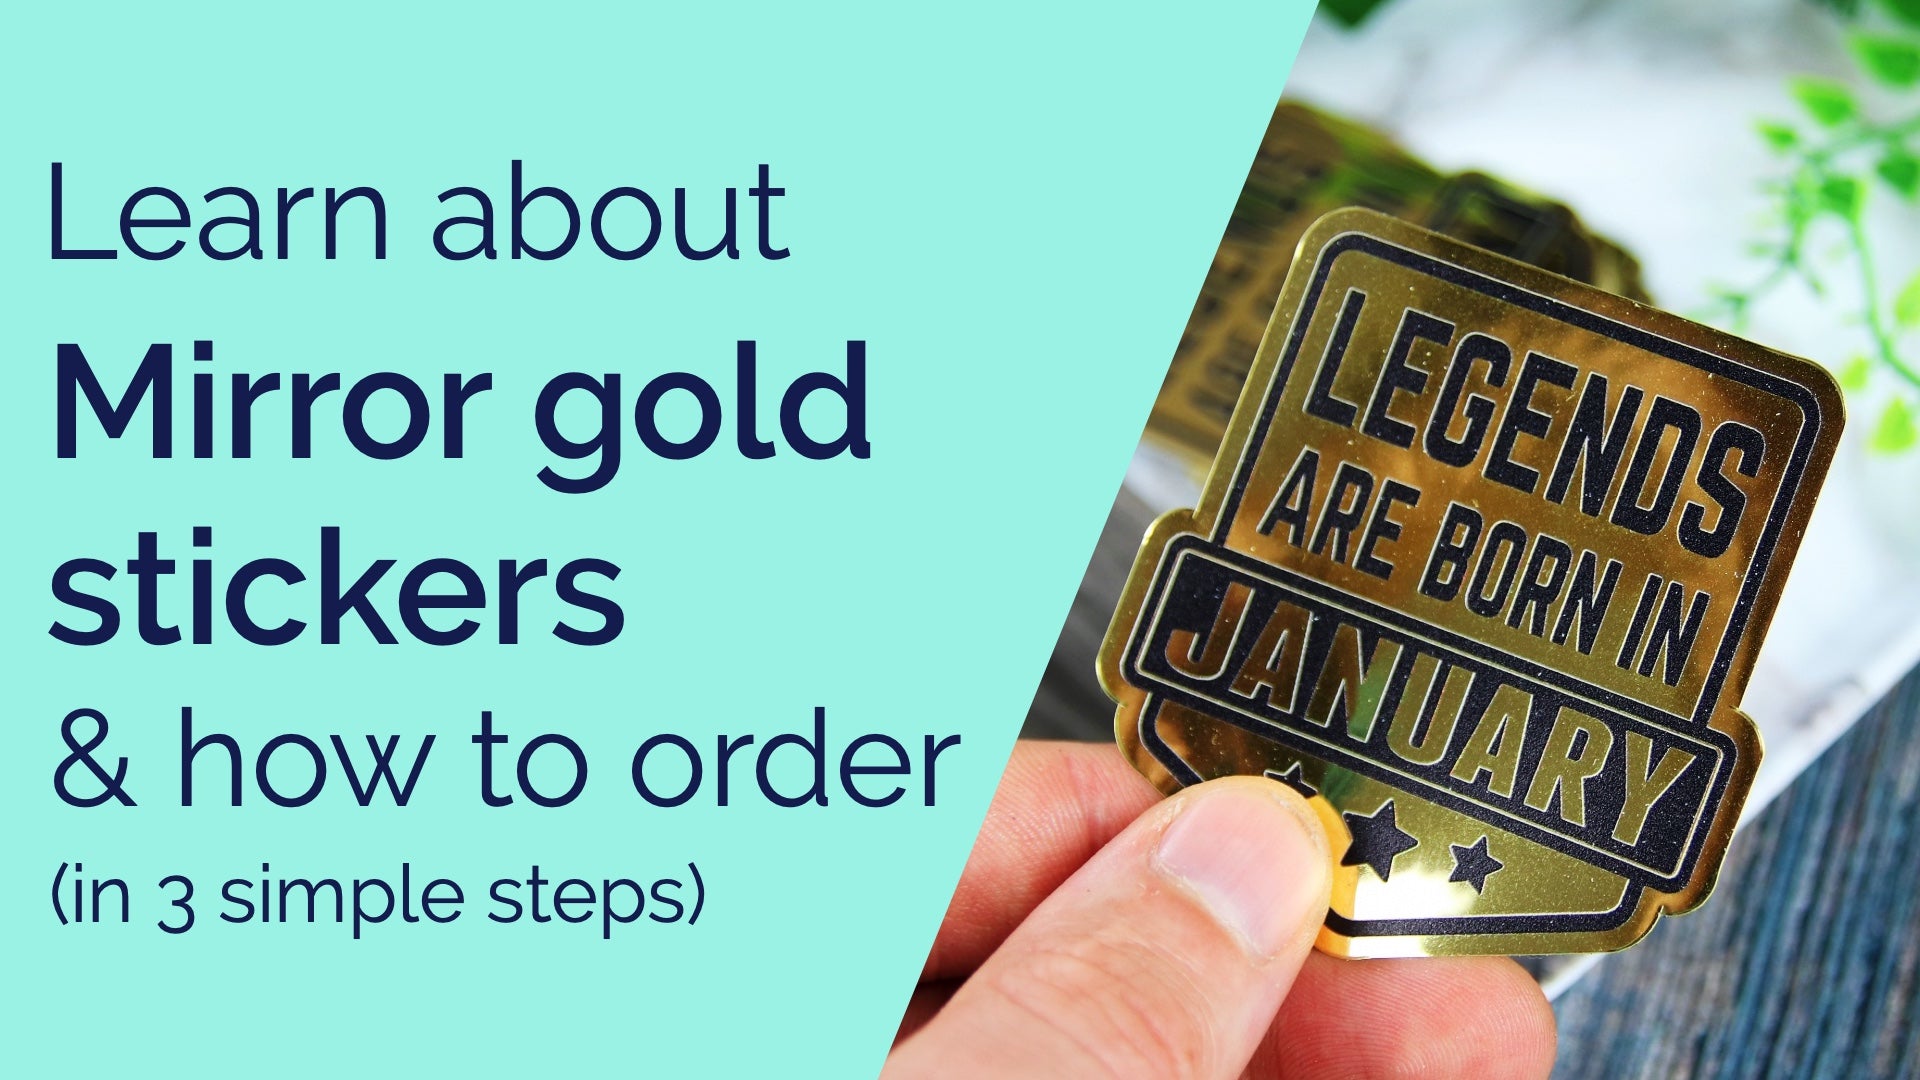 Video laden: A video explaining what mirror gold stickers are and how to order them